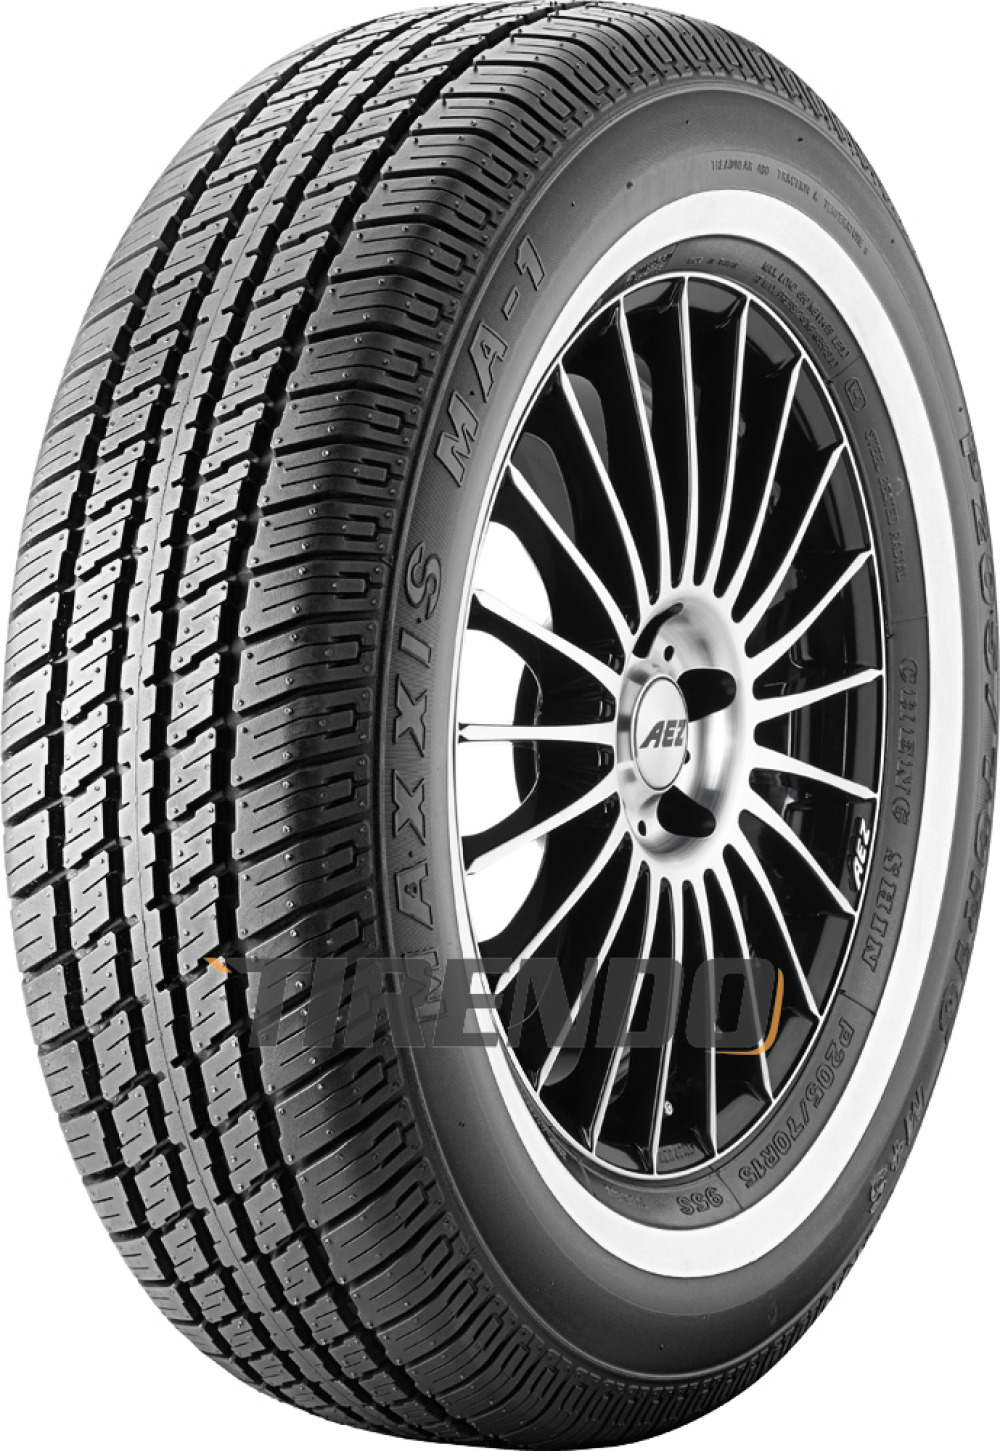 Maxxis MA 1 ( 195/75 R14 92S WSW 20mm ) von Maxxis